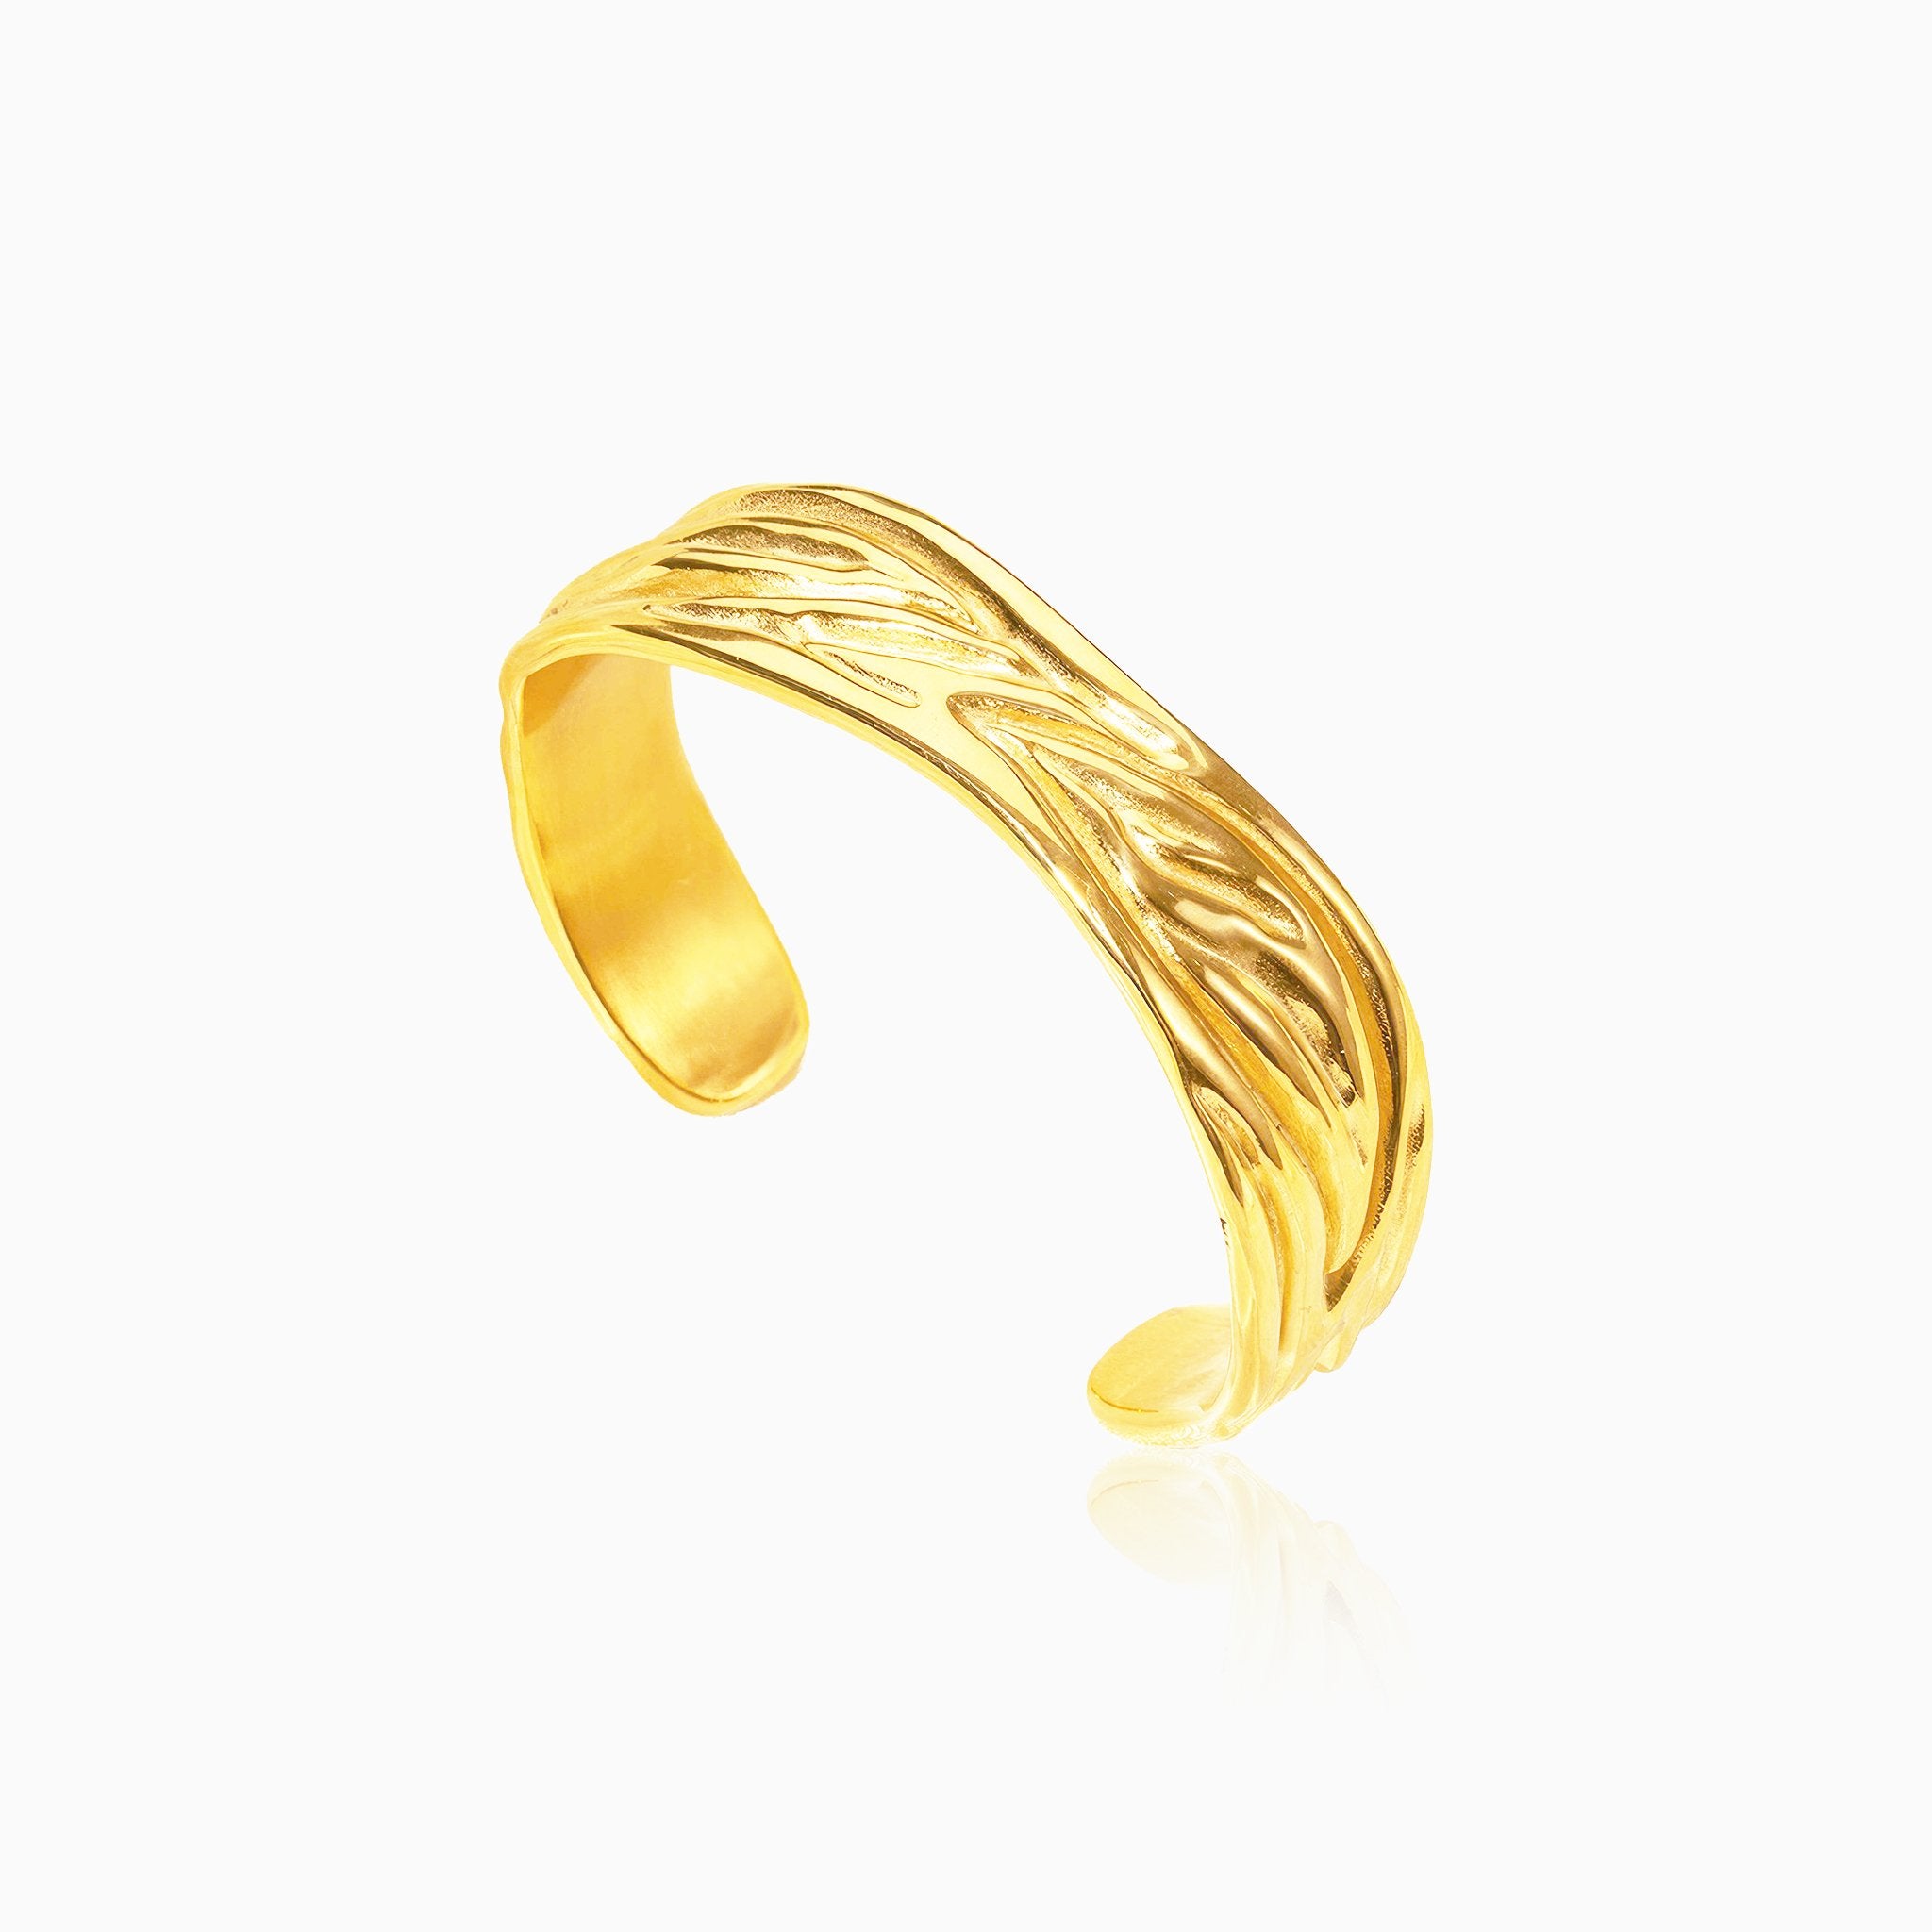 Wrinkle Texture Cuff Bracelet - Nobbier - Bracelet - 18K Gold And Titanium PVD Coated Jewelry